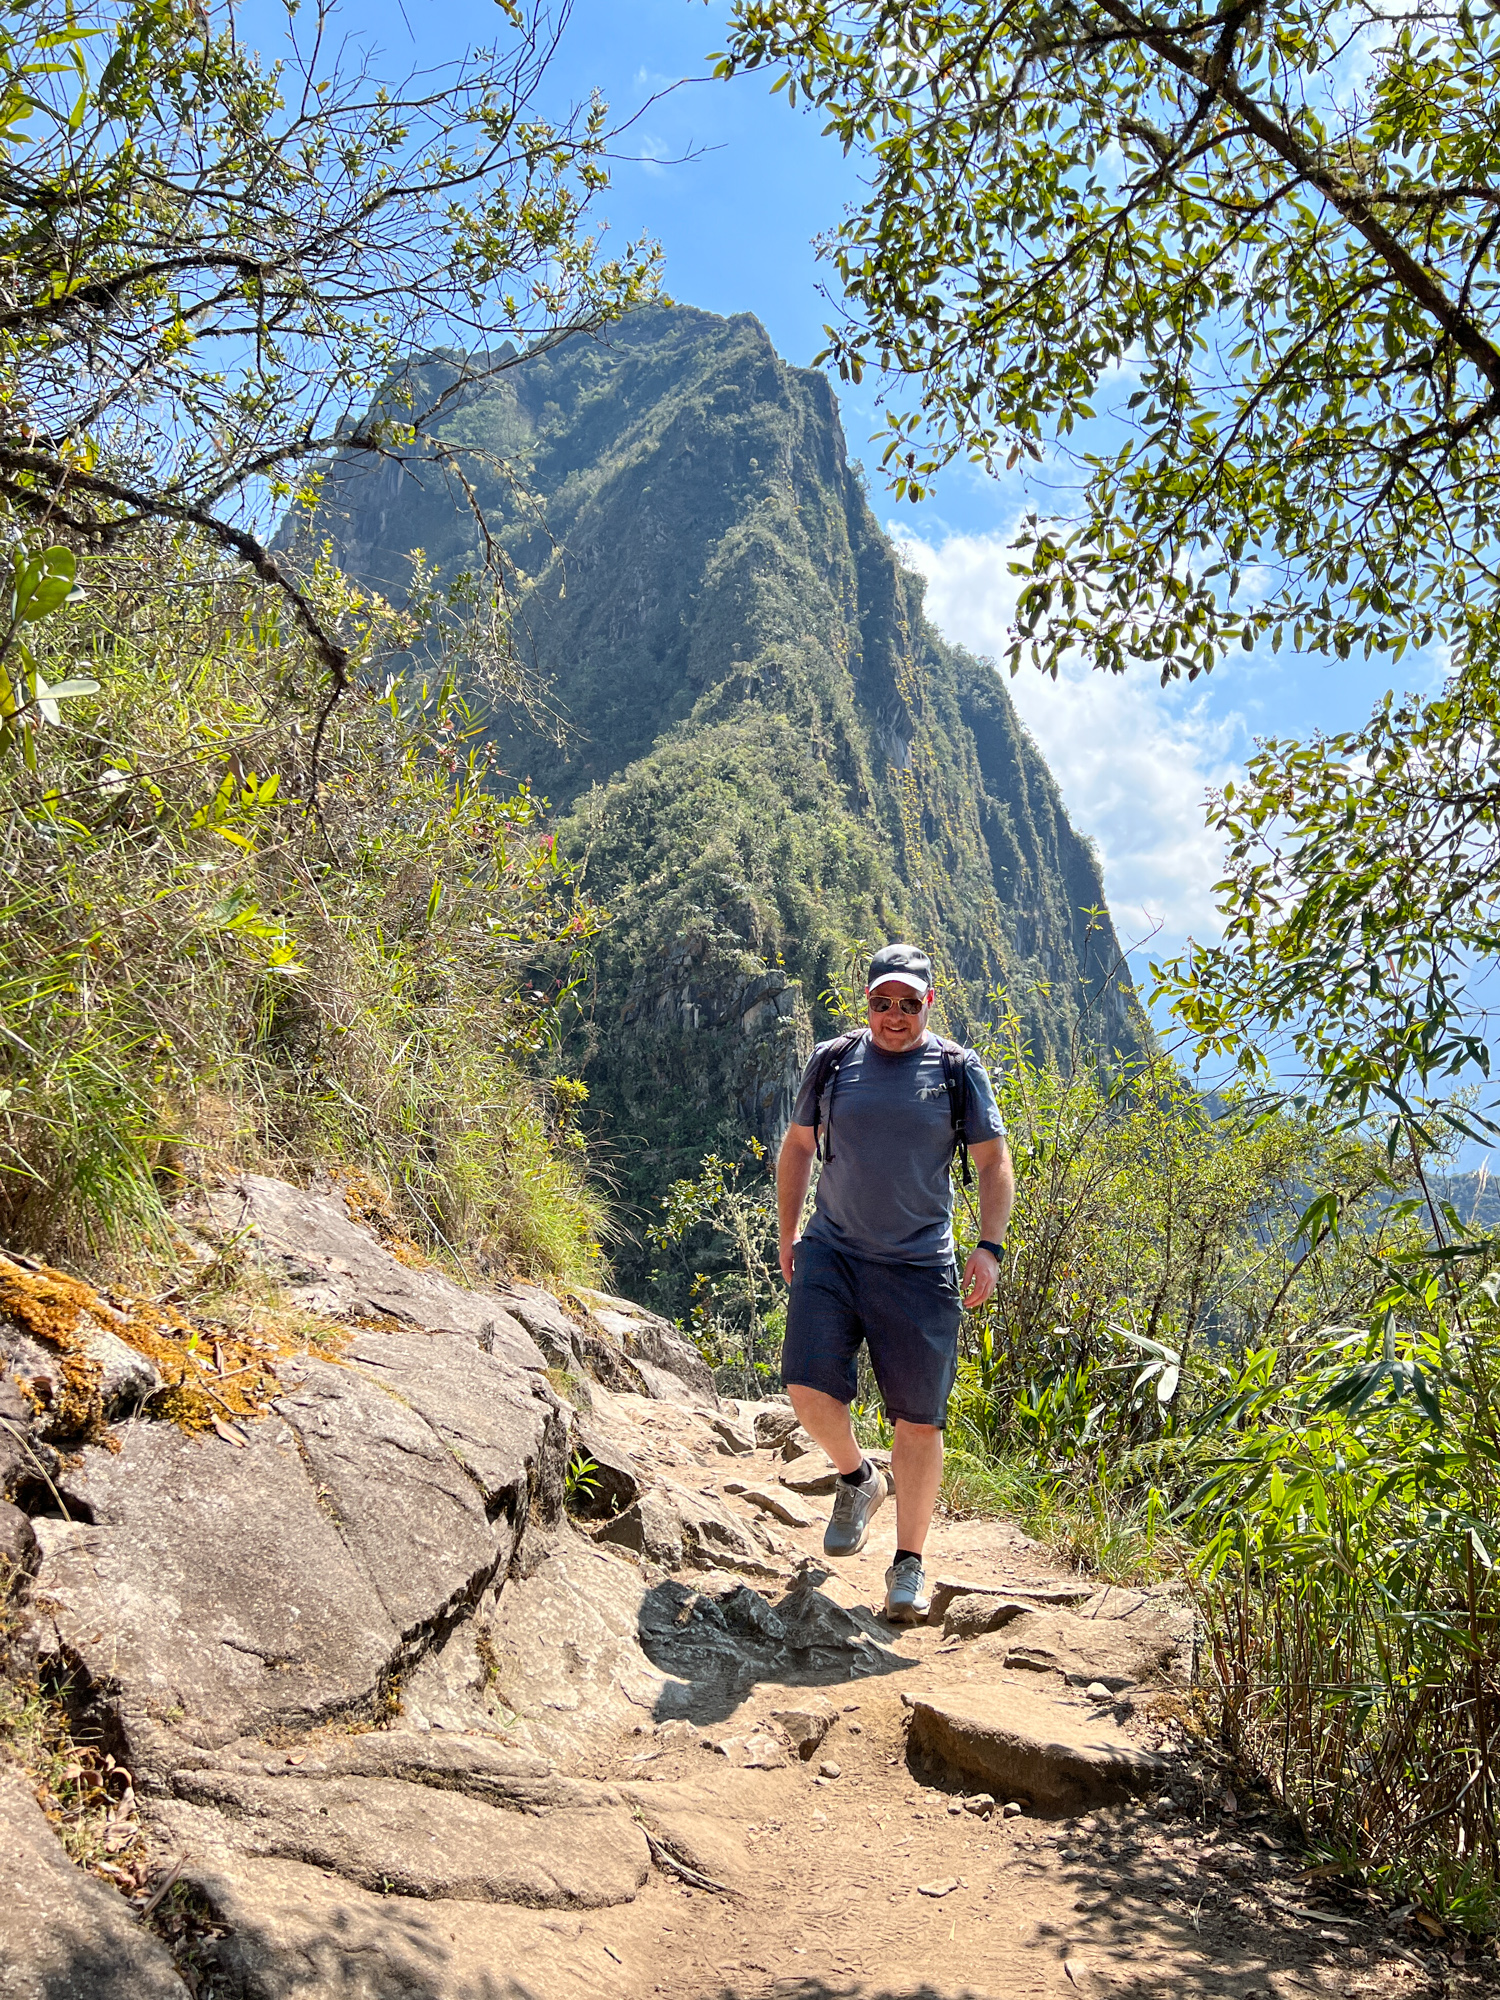 Dave on his way out of Machu Picchu after hiking Huayna Picchu in the background. (photo by Kelly Lemons)